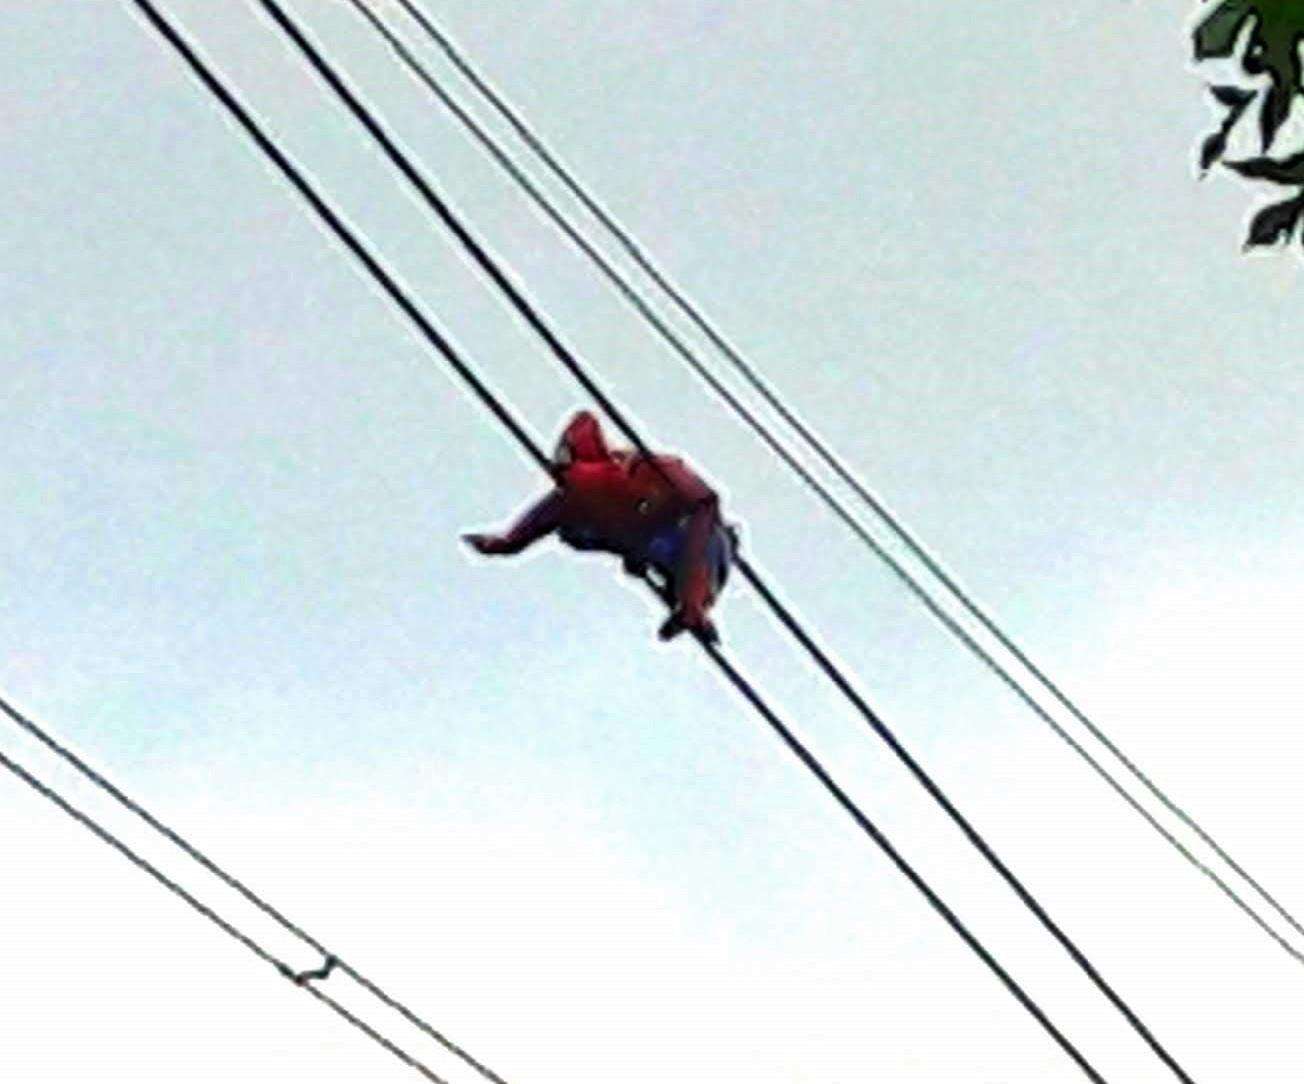 Spiderman tangled in a web of power cables (2791737)